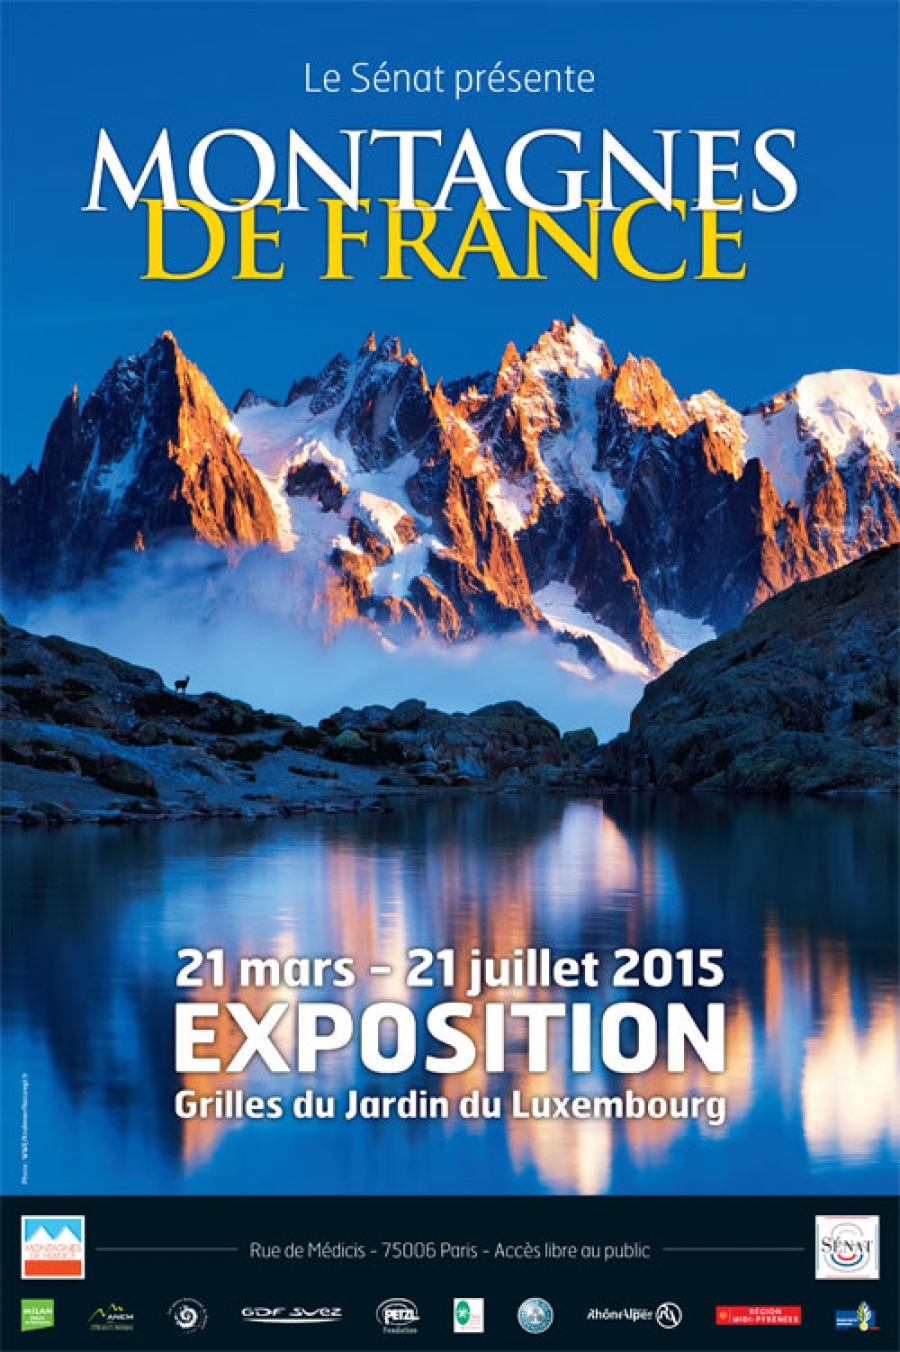 “Mountains of France” Exhibition in Paris